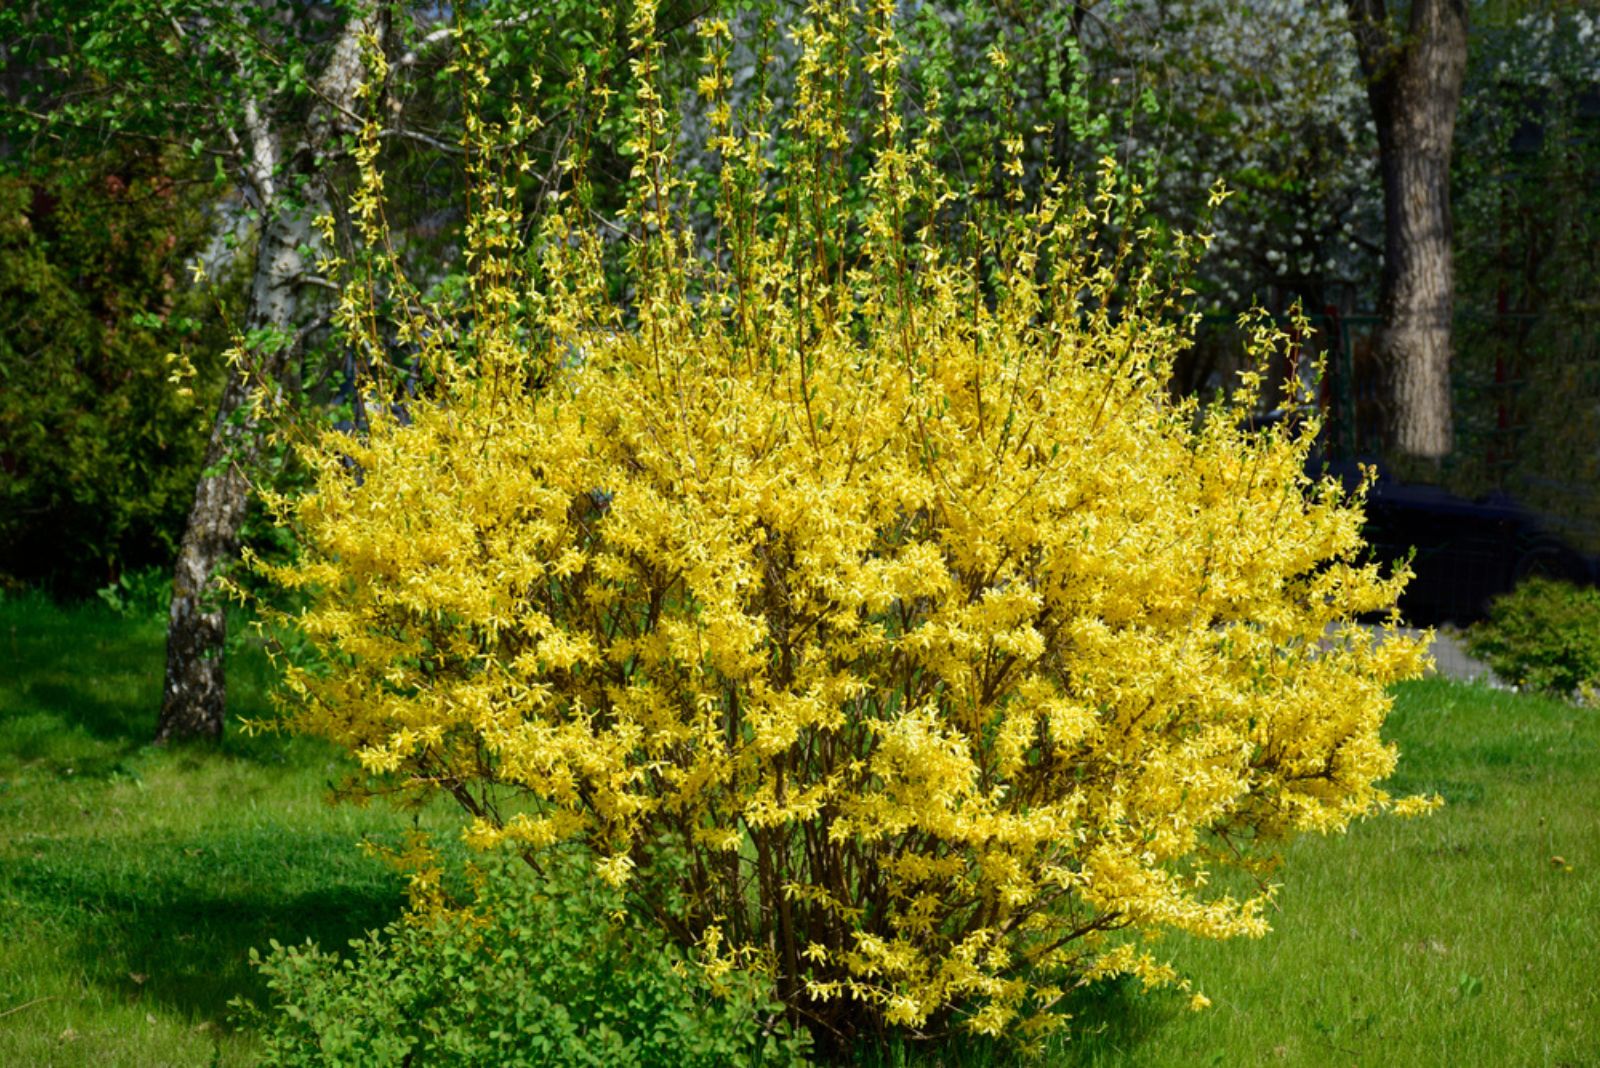 Forsythia flowers in front of with green grass and dark green bushes